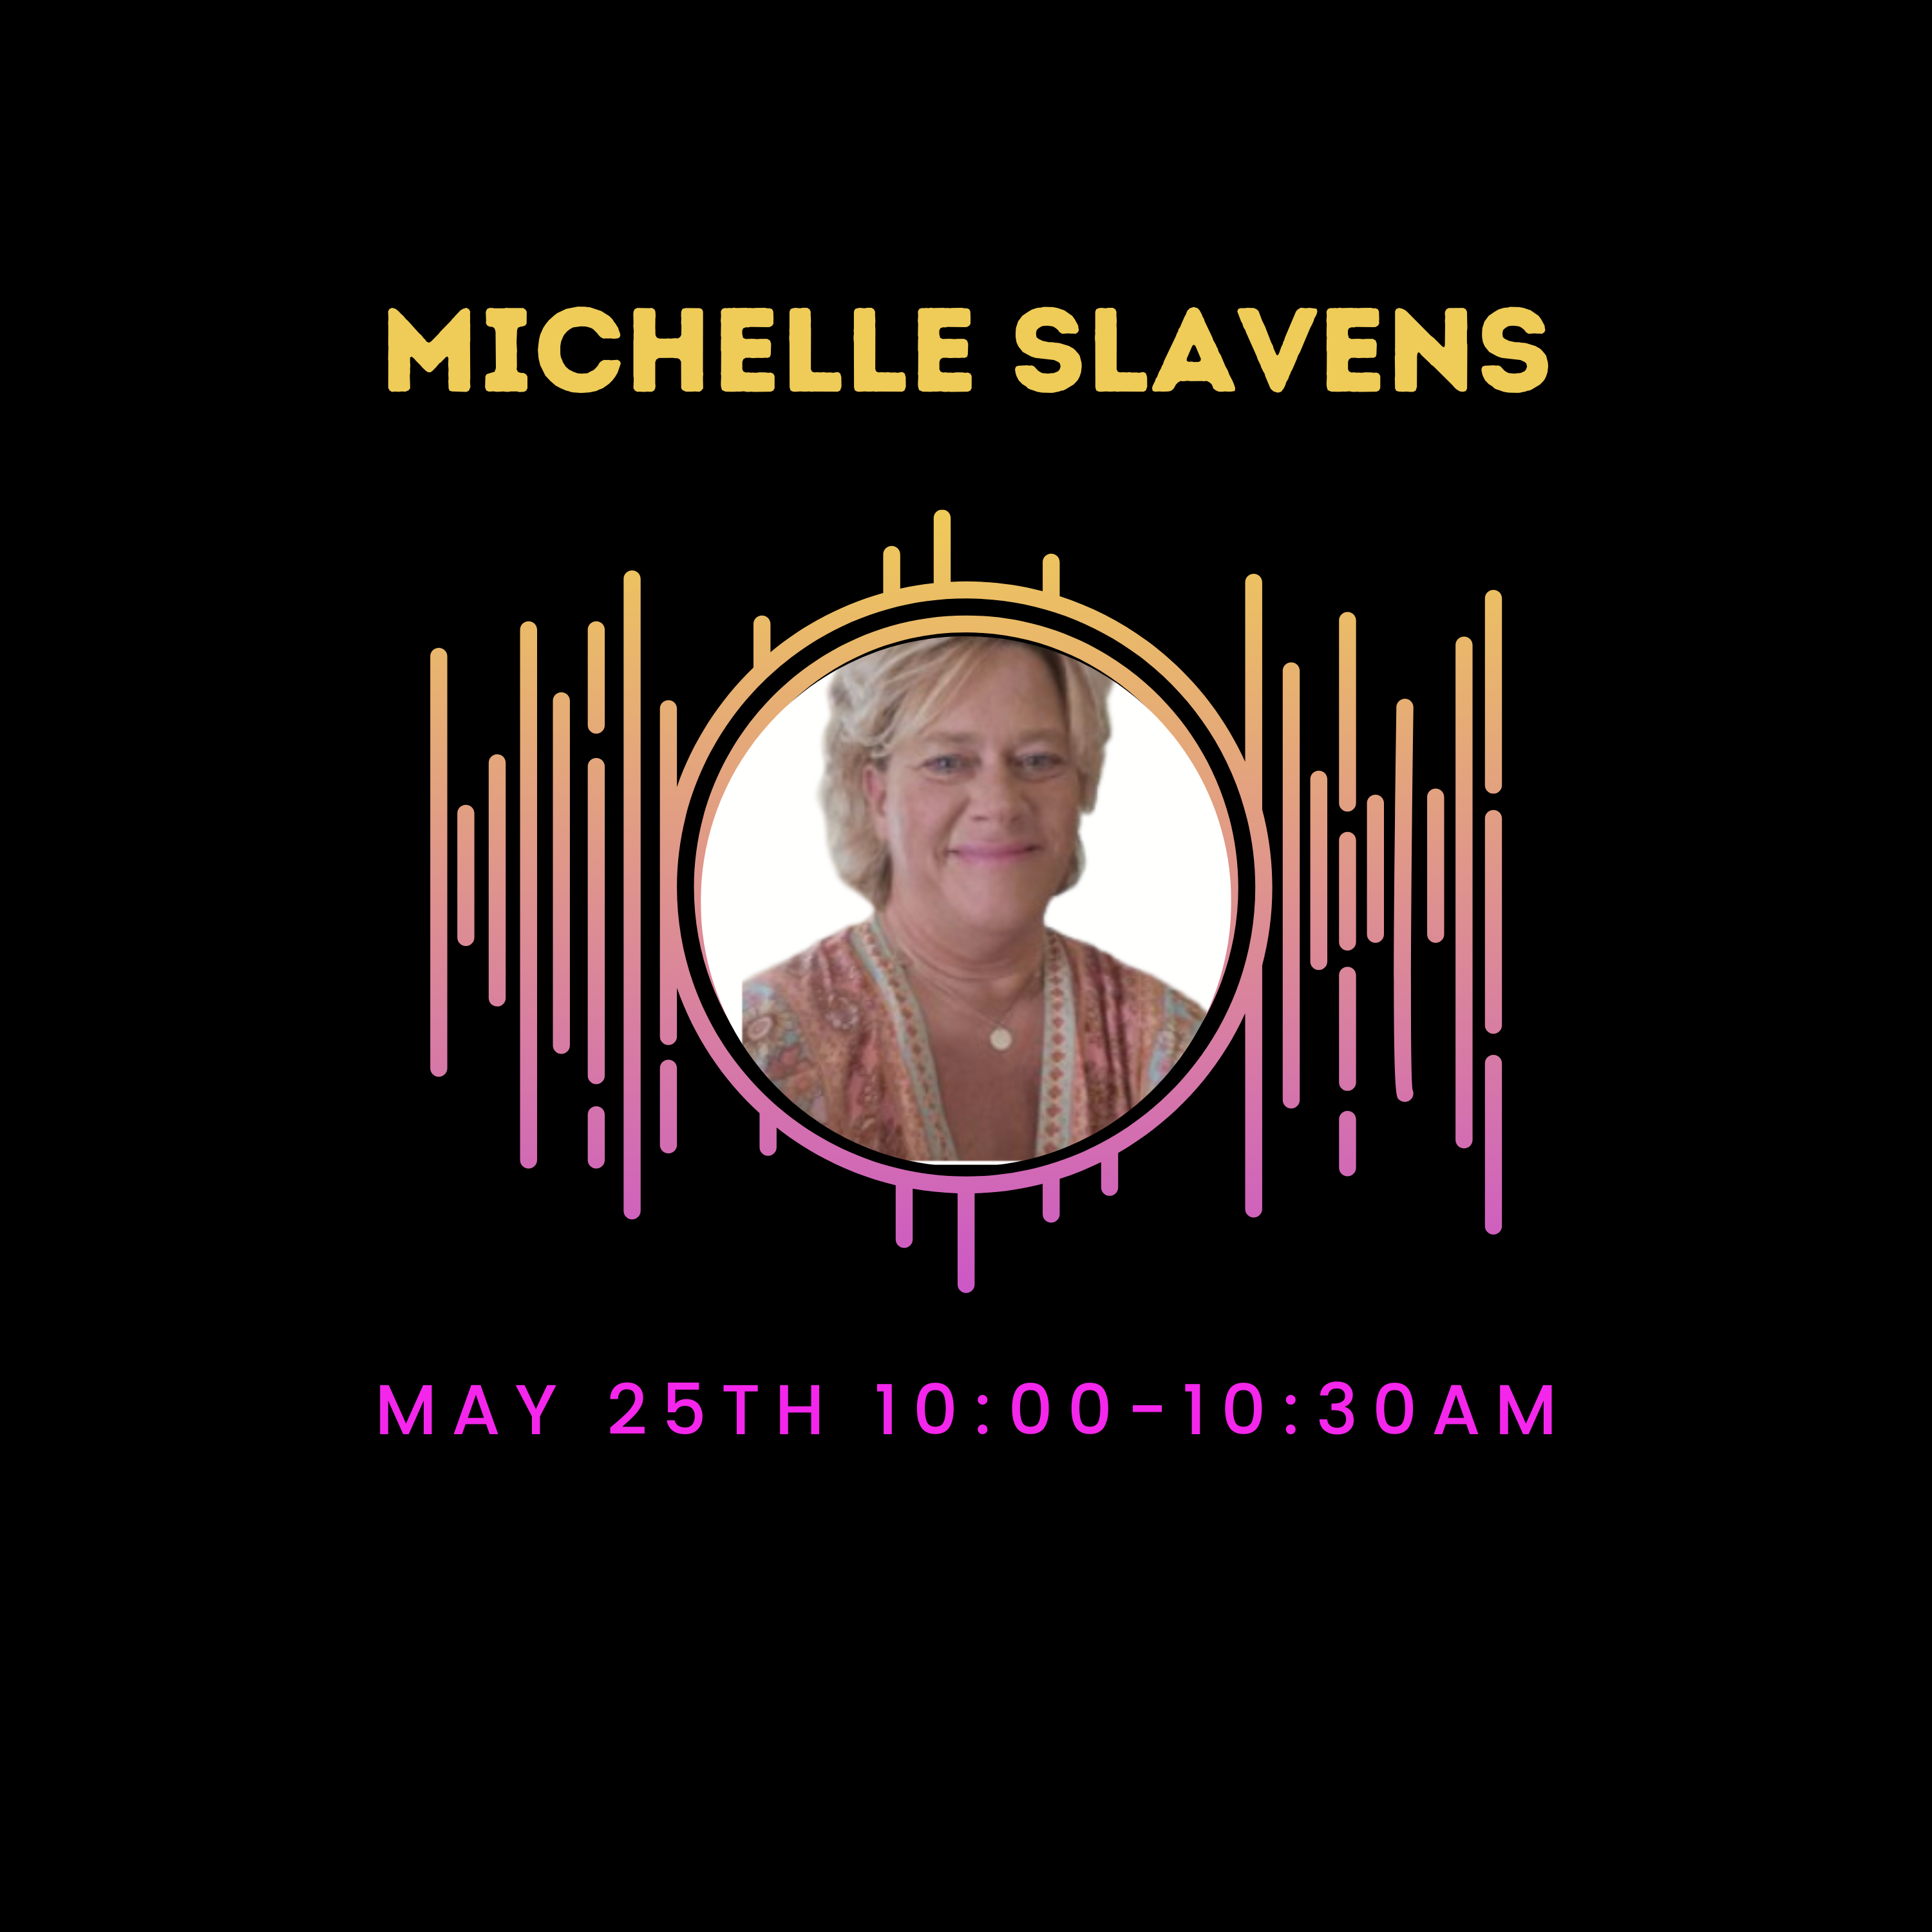 Promotional graphic for the Reflect Live Podcast featuring a portrait of Michelle Slavens encircled by a pink and orange waveform graphic. The text above her photo reads 'MICHELLE SLAVENS' in bold yellow letters. Below her image, the date and time of the podcast, 'MAY 25TH 10:00–10:30AM', are listed, set against a black background. This image is used to promote an upcoming interview segment on the podcast